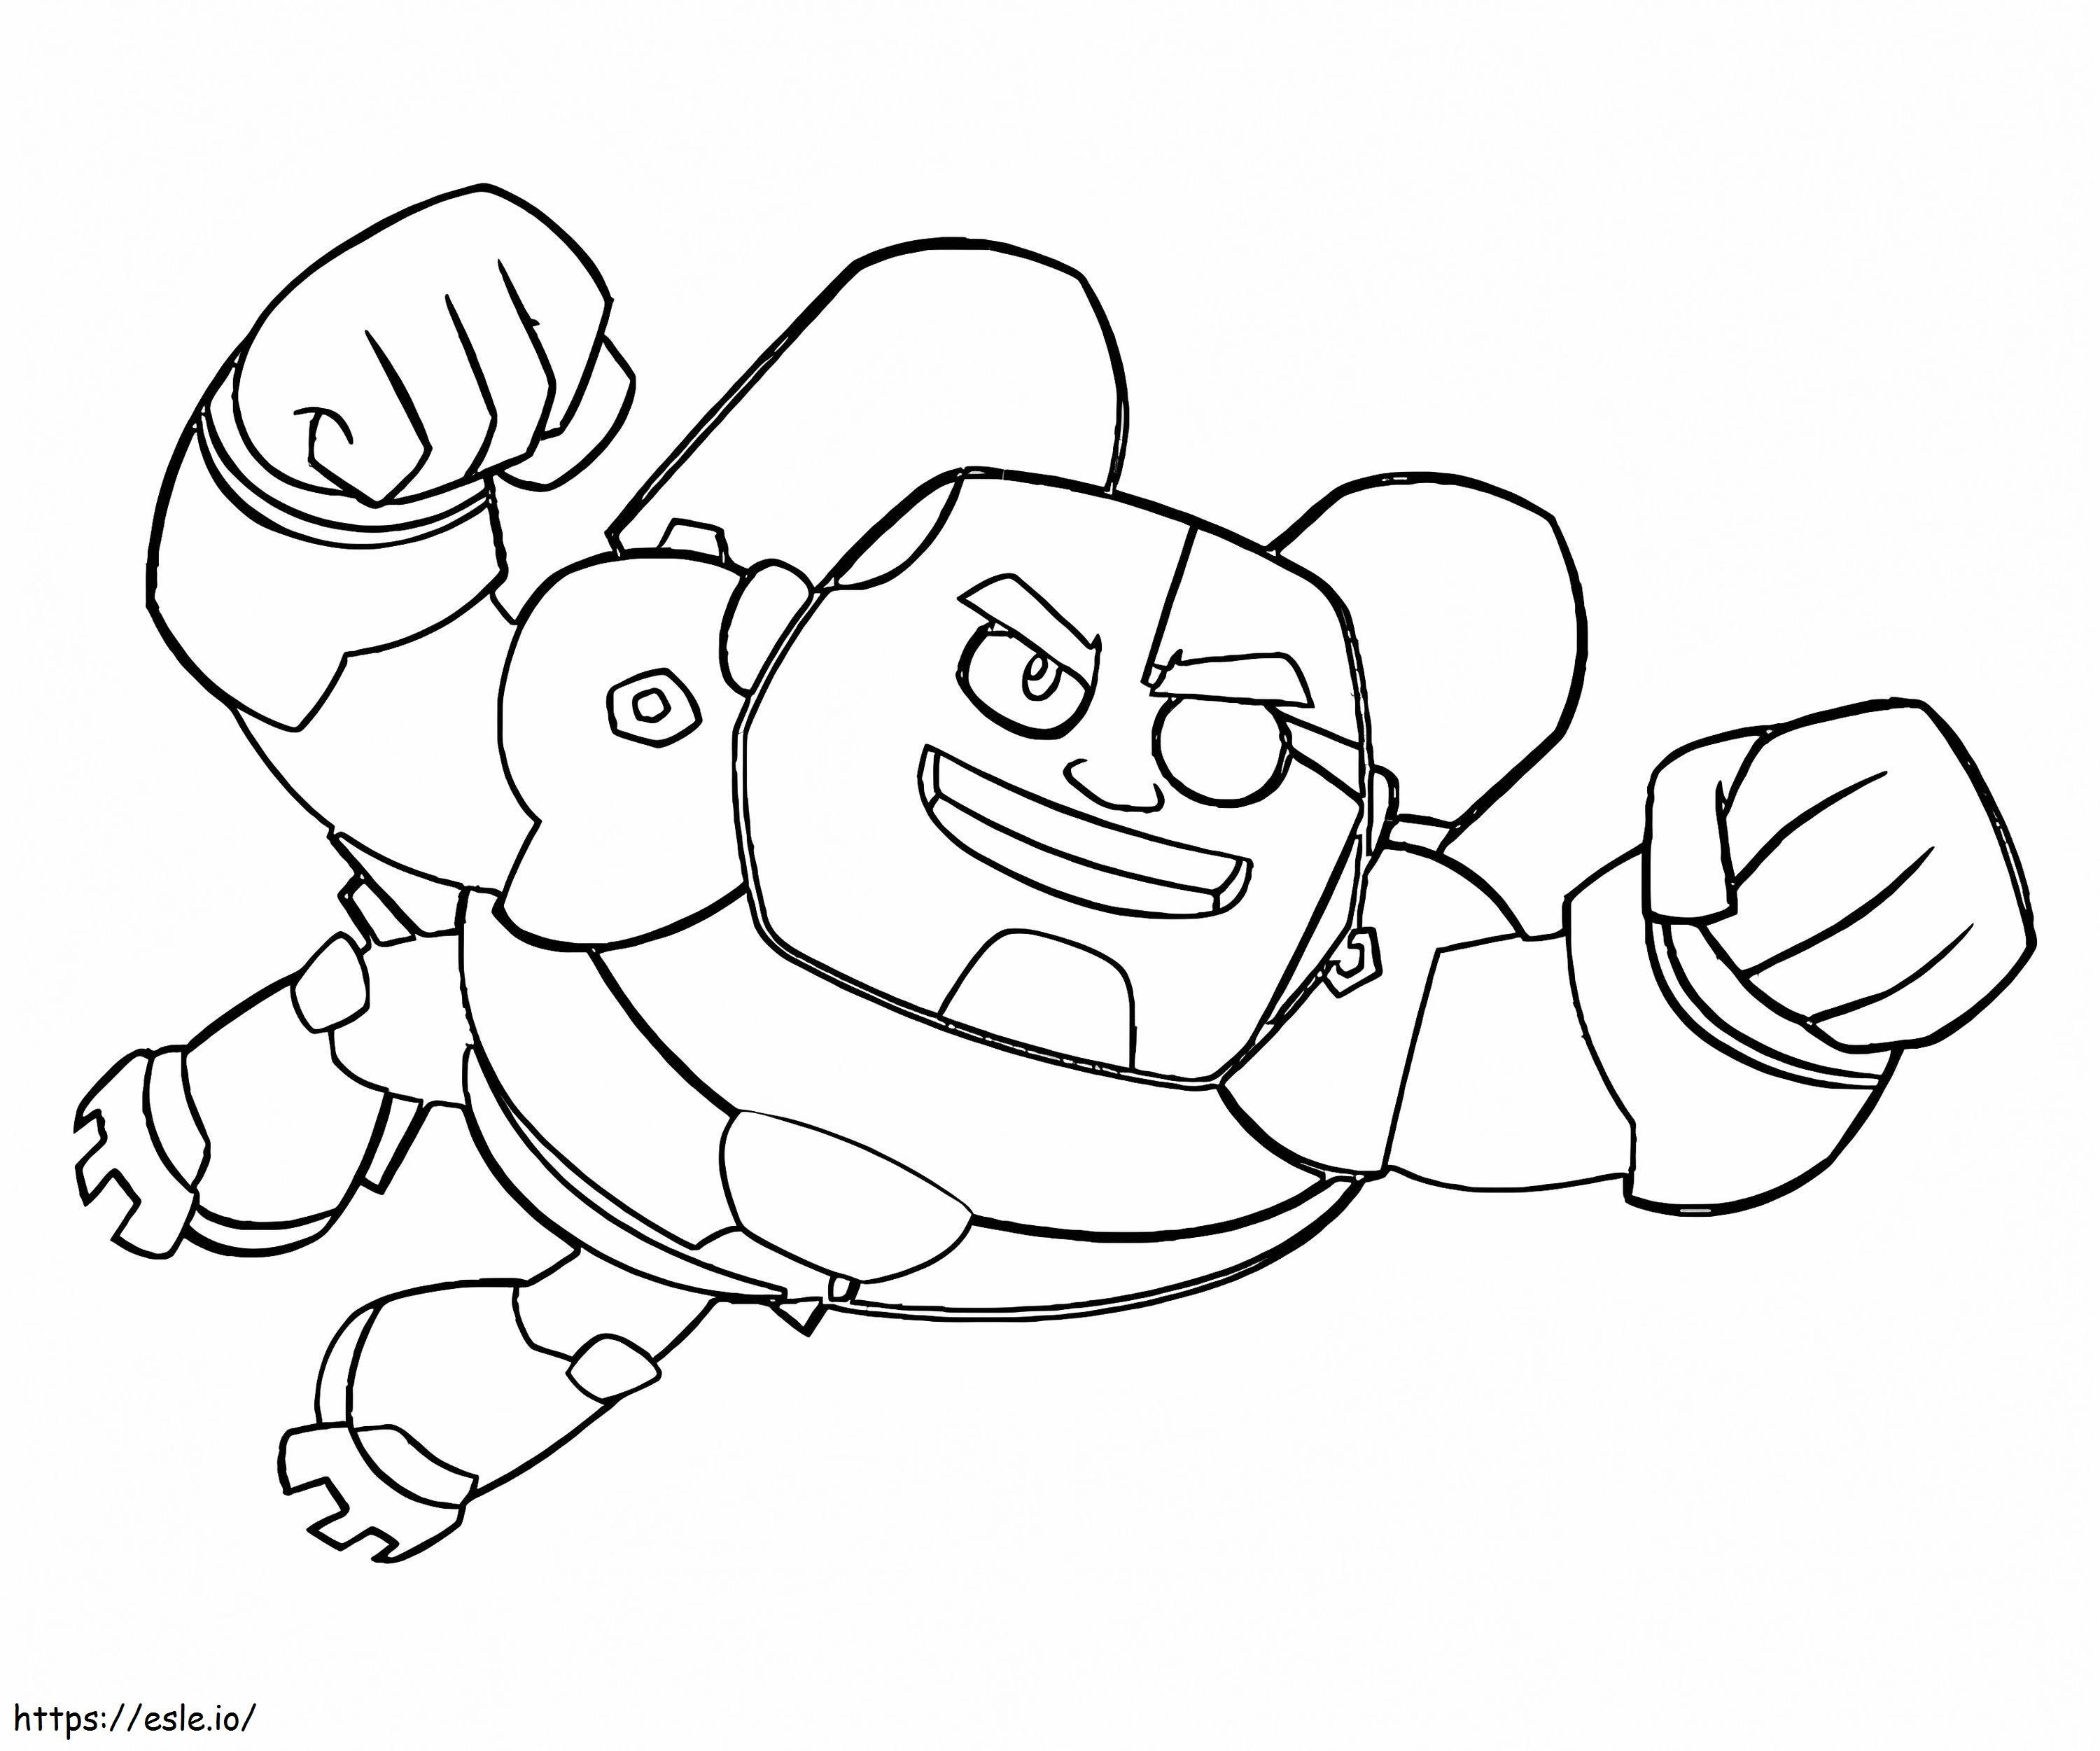 Cyborg Flying coloring page